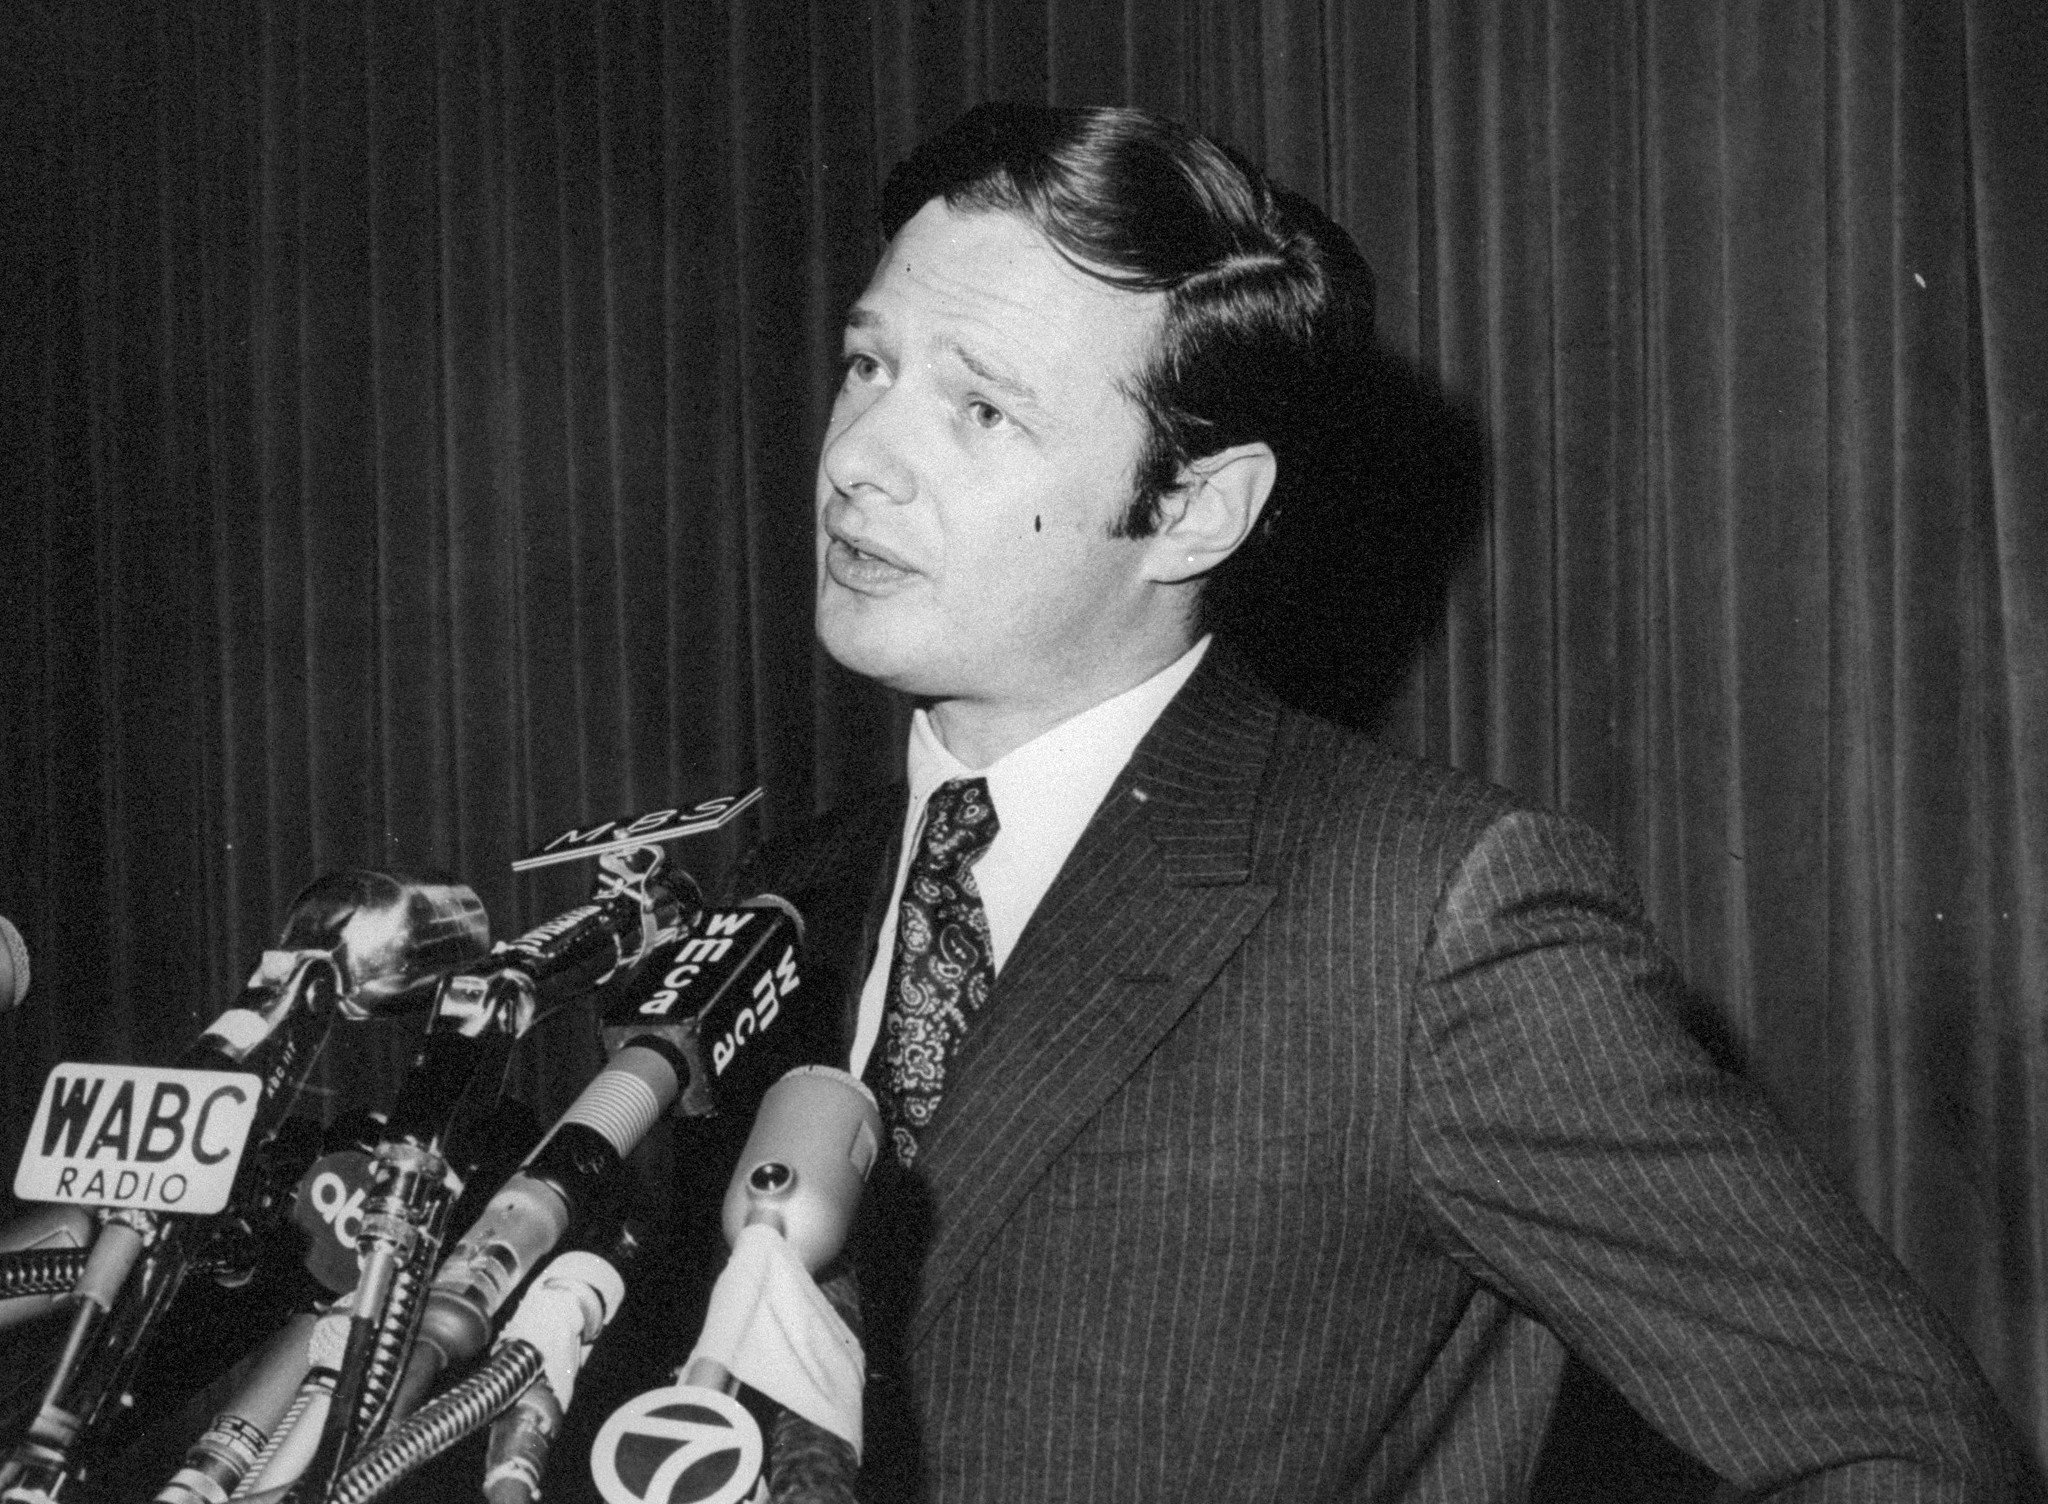 Brian Epstein surrounded by microphones